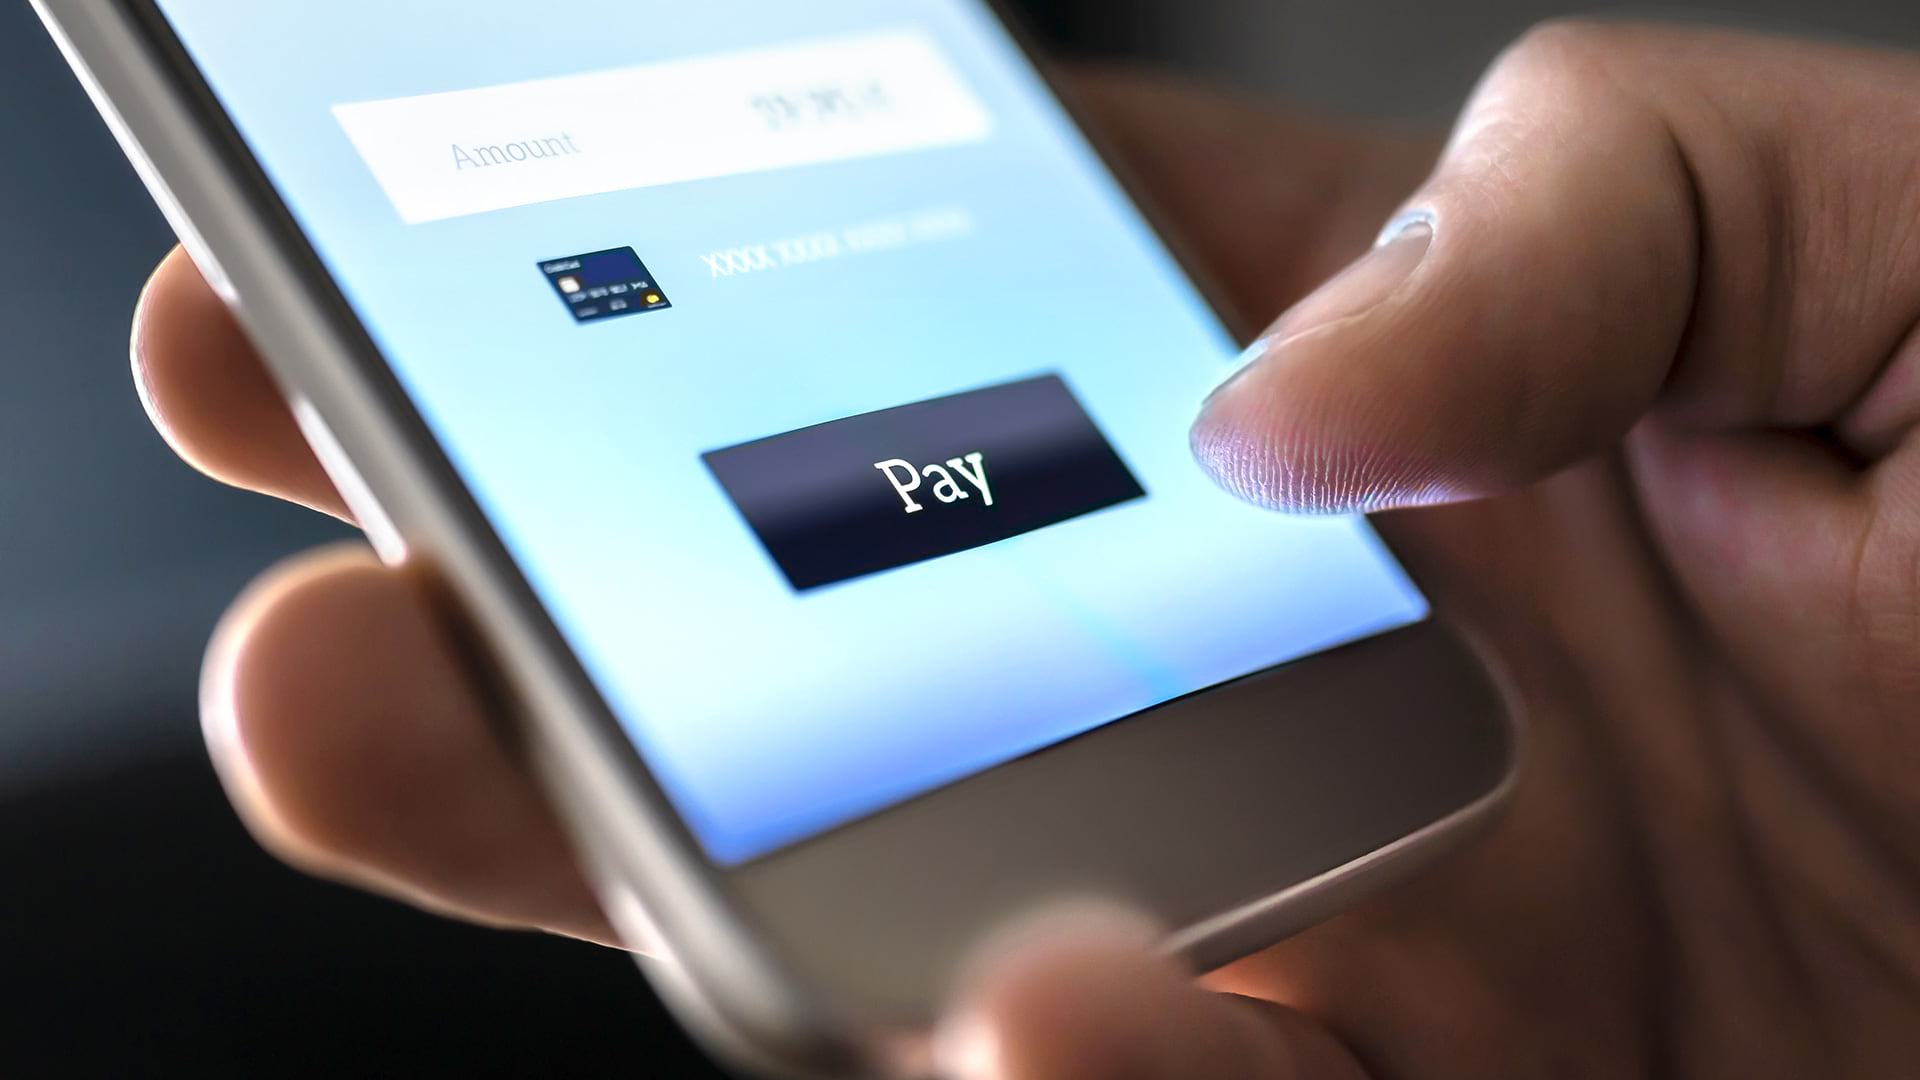 A cashless transaction facilitated by a mobile phone